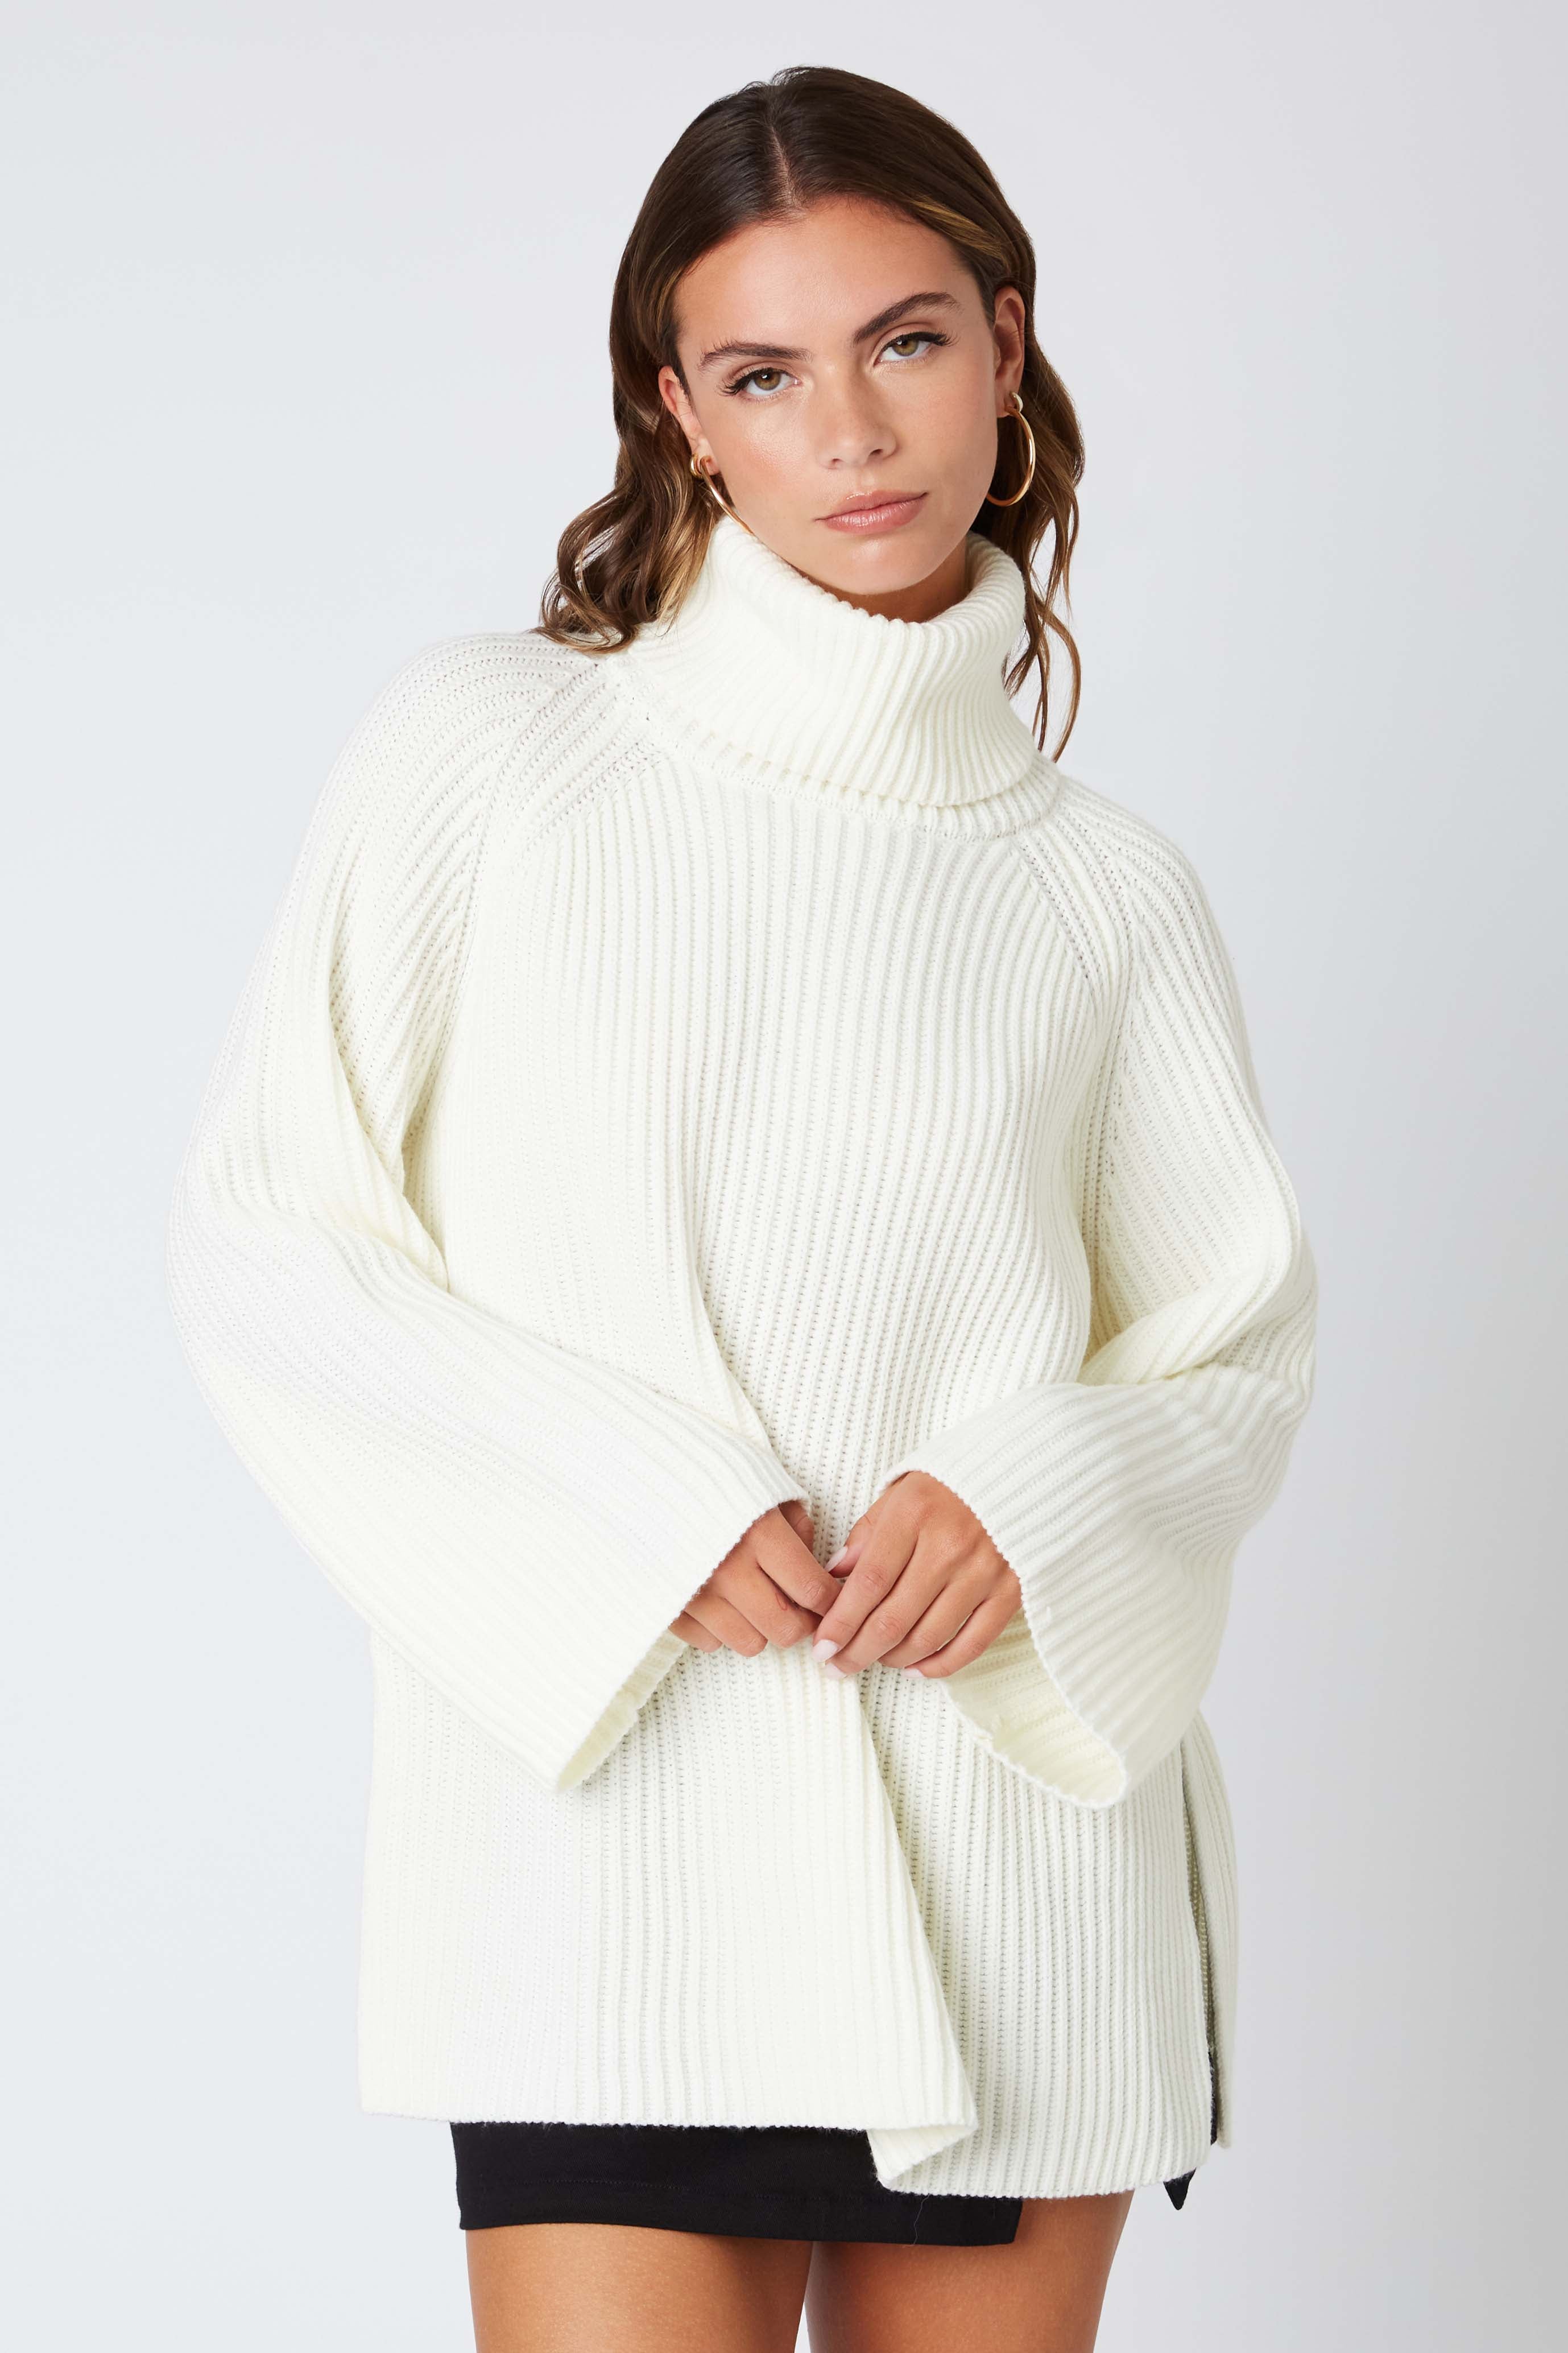 Oversized Turtleneck Sweater in Ivory Front View